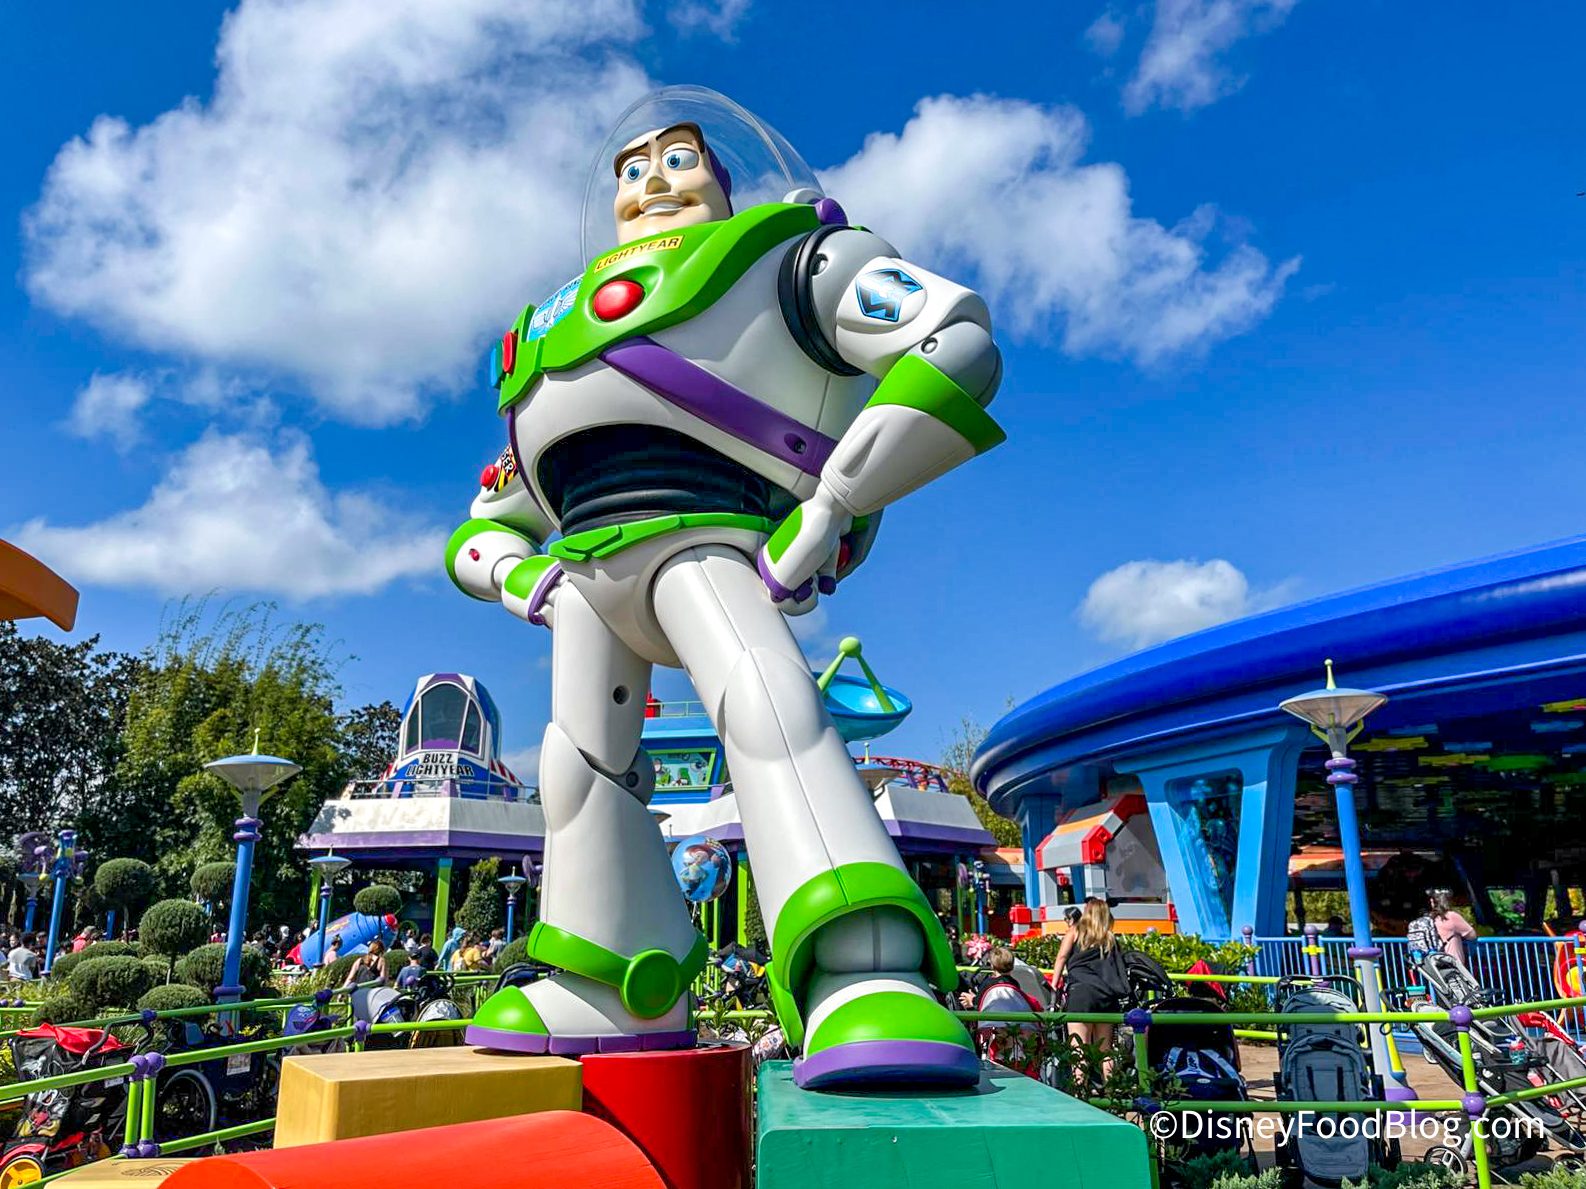 VIDEO: Disney Released a NEW Trailer for 'Lightyear' and We Have